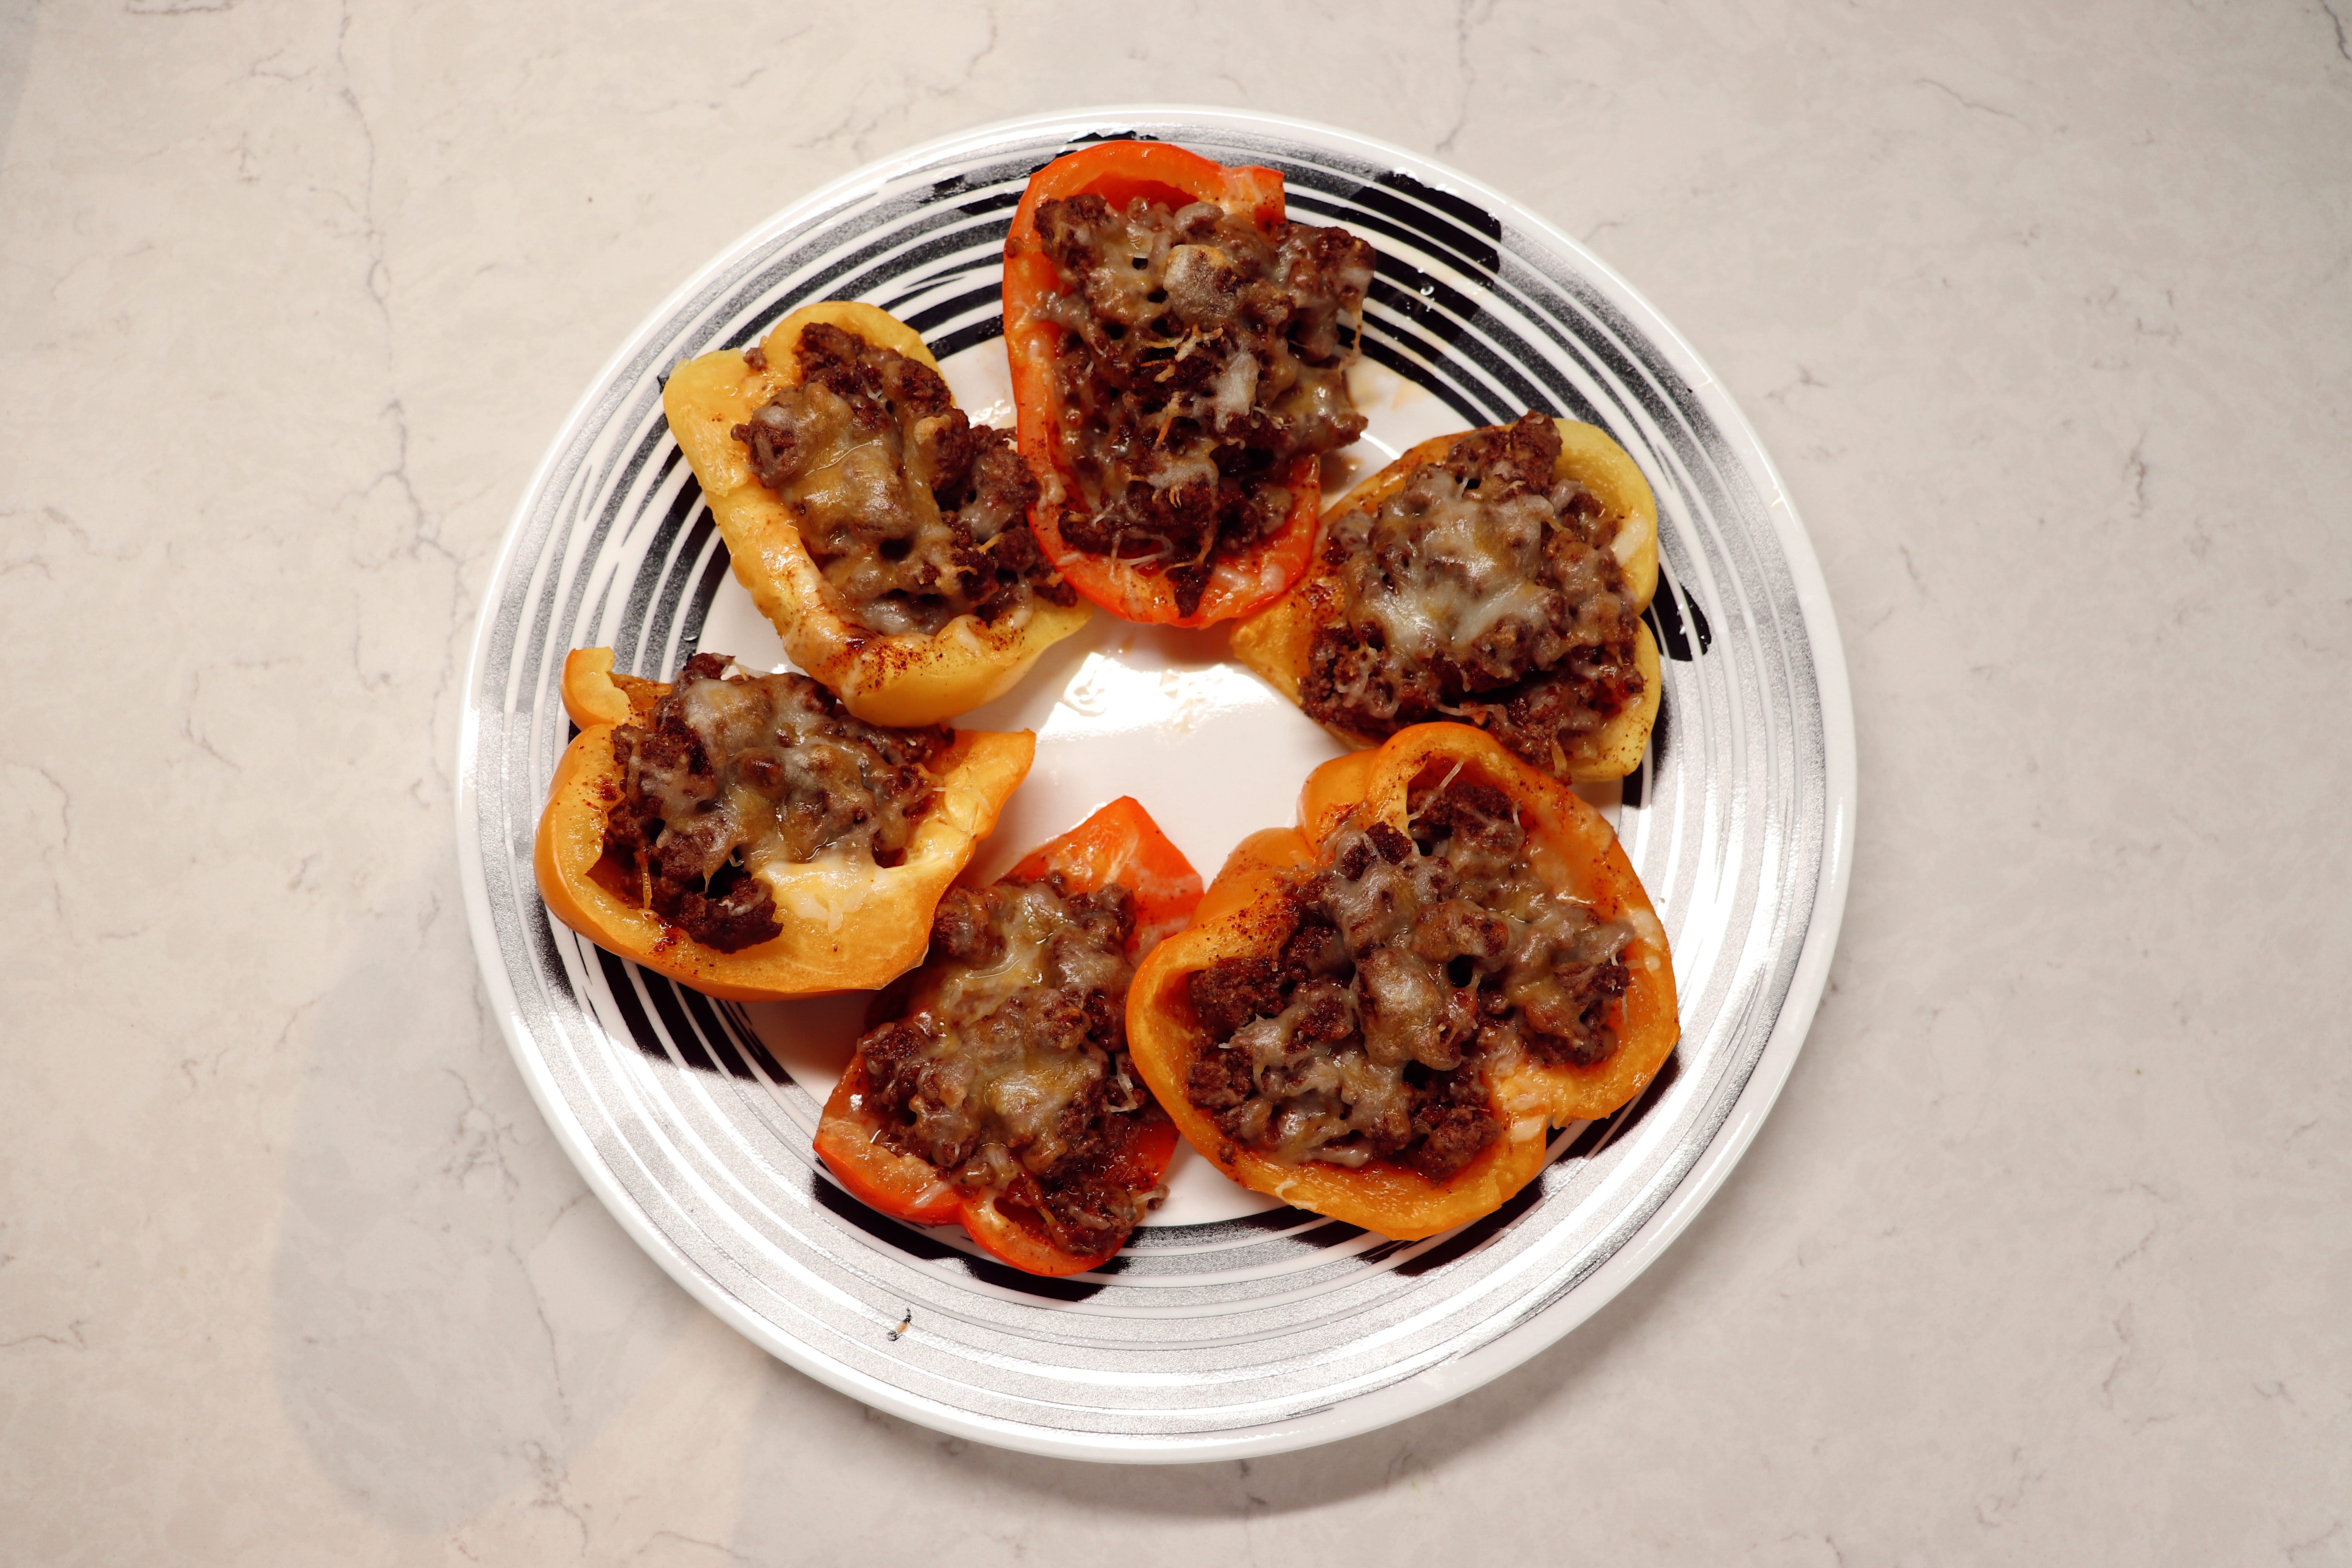 Top Nashville Lifestyle blogger, Nashville Wifestyles shares her Skinny Bell Pepper Nacho Boats Appetizer Recipe. Click here to check it out!